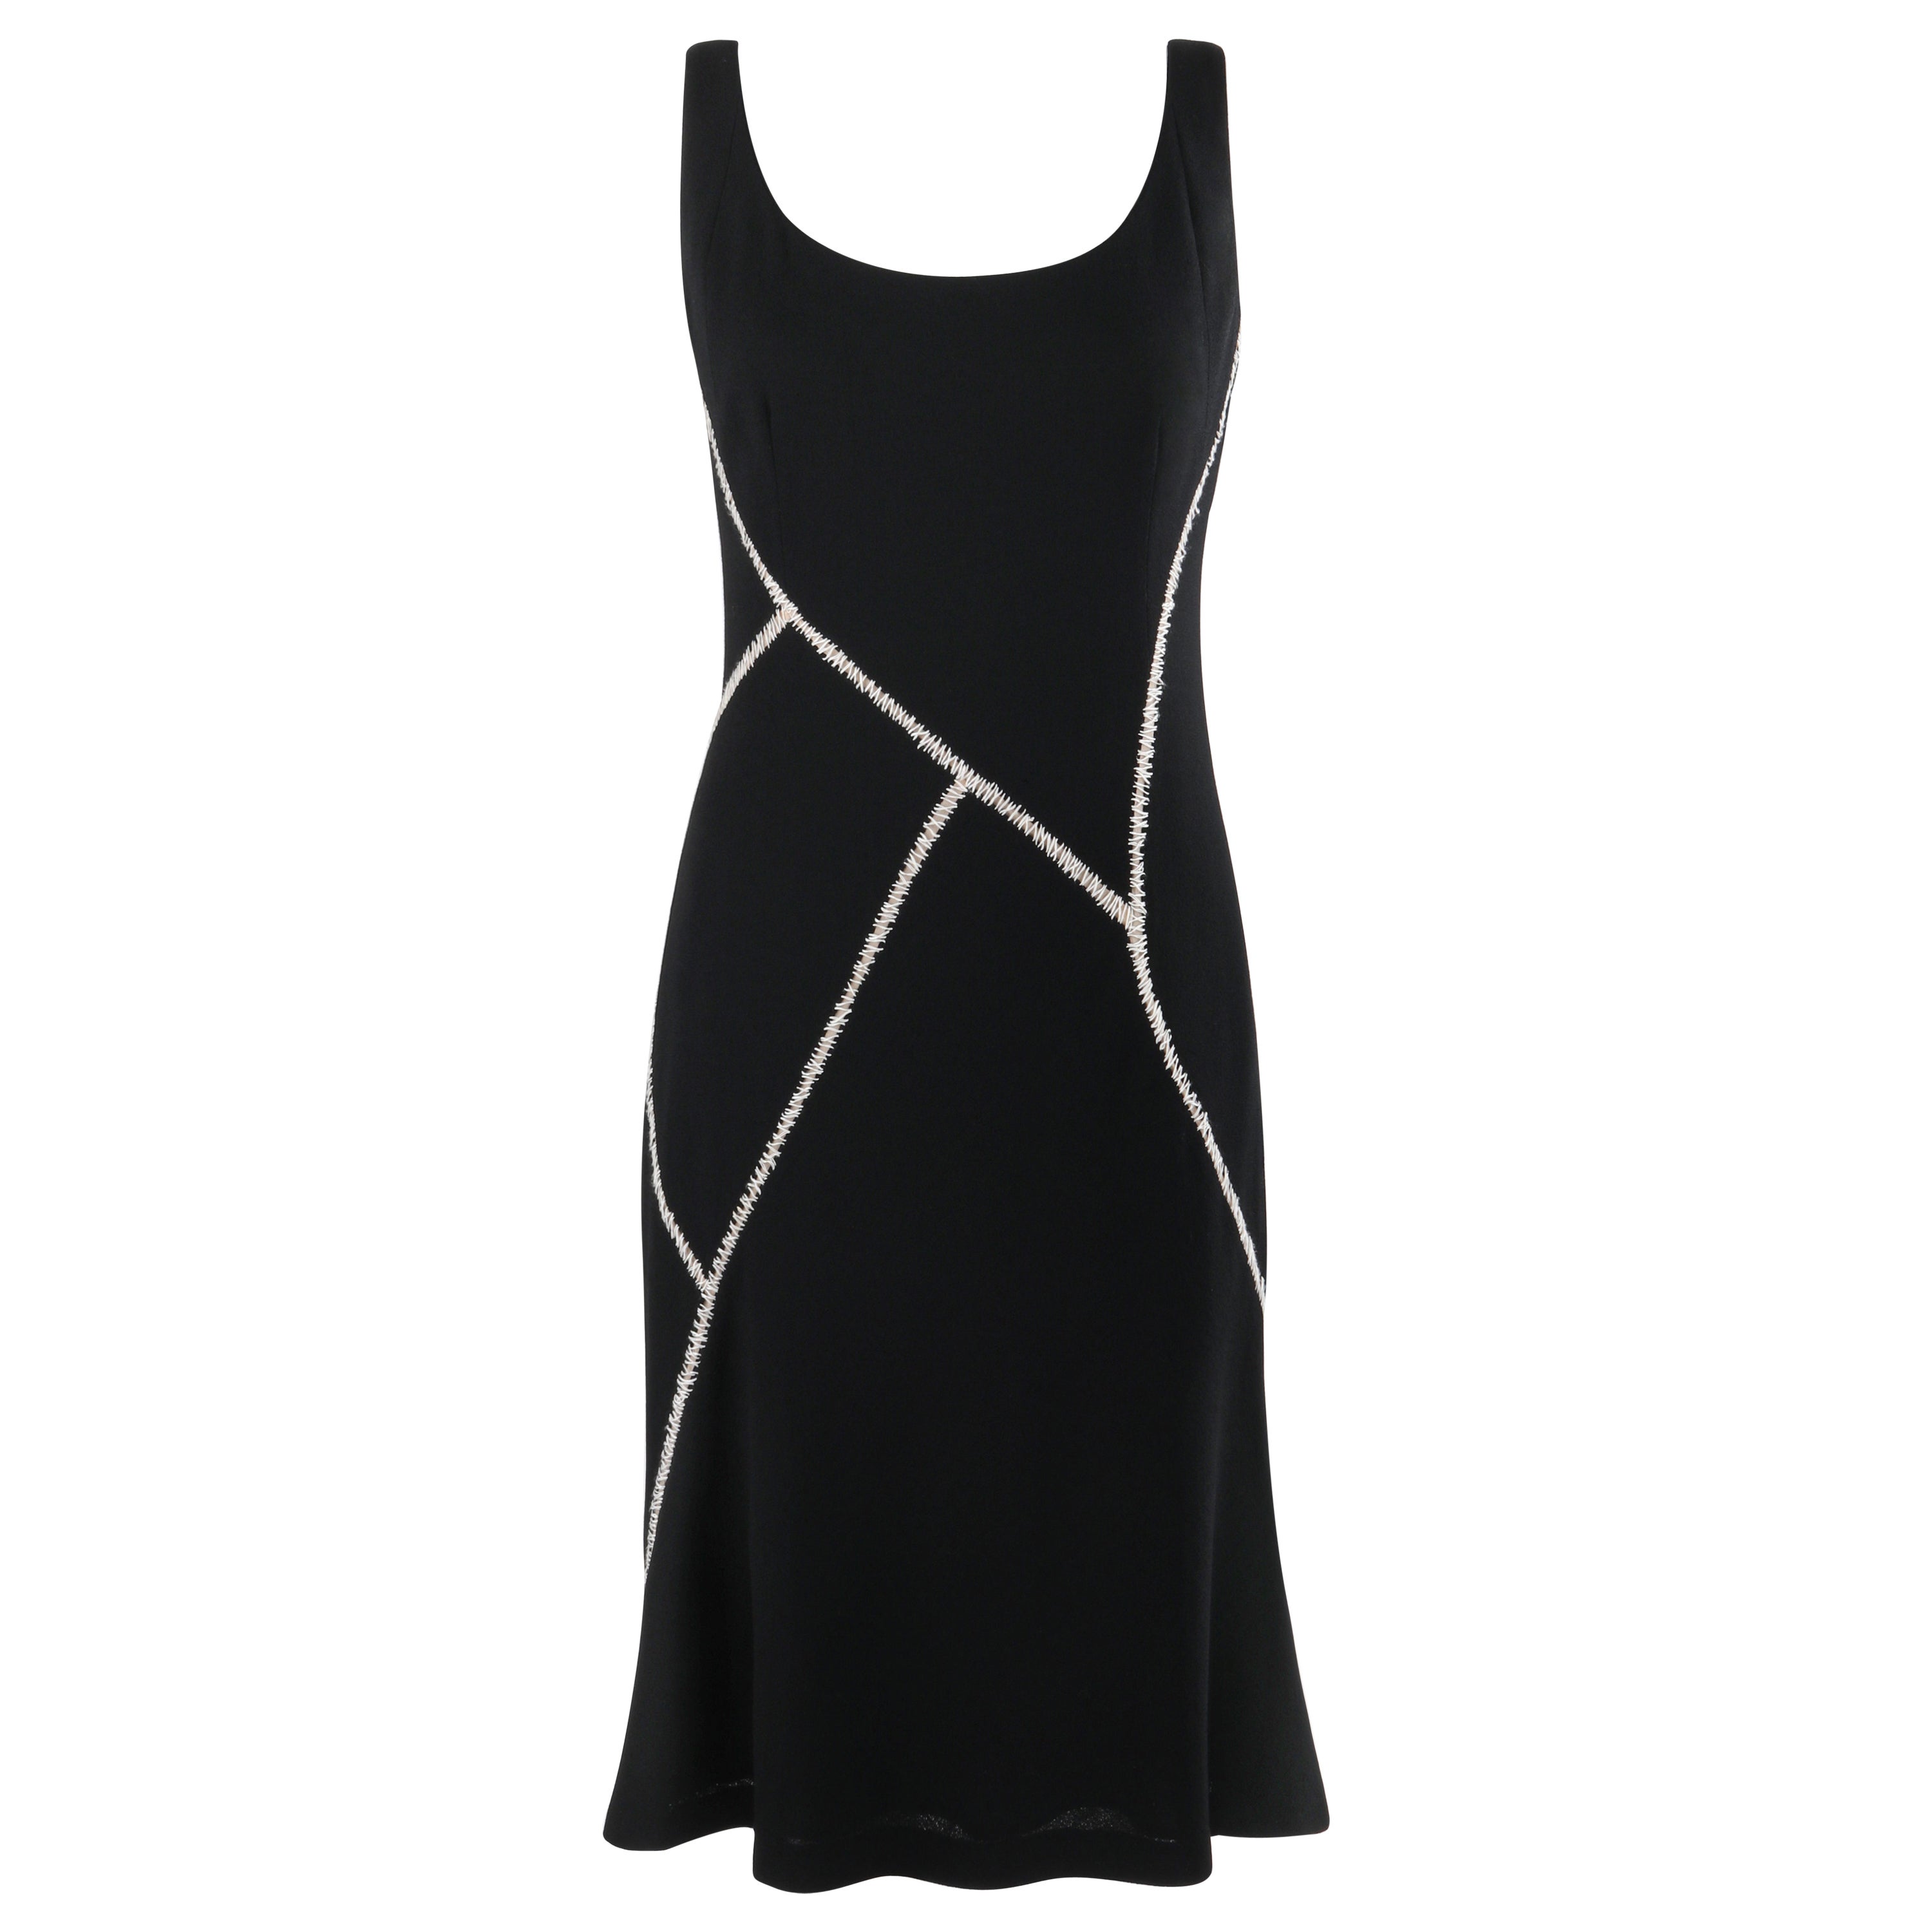 ALEXANDER McQUEEN S/S 2003 Black Ivory Contrast Stitch Kick Flare Cocktail Dress For Sale